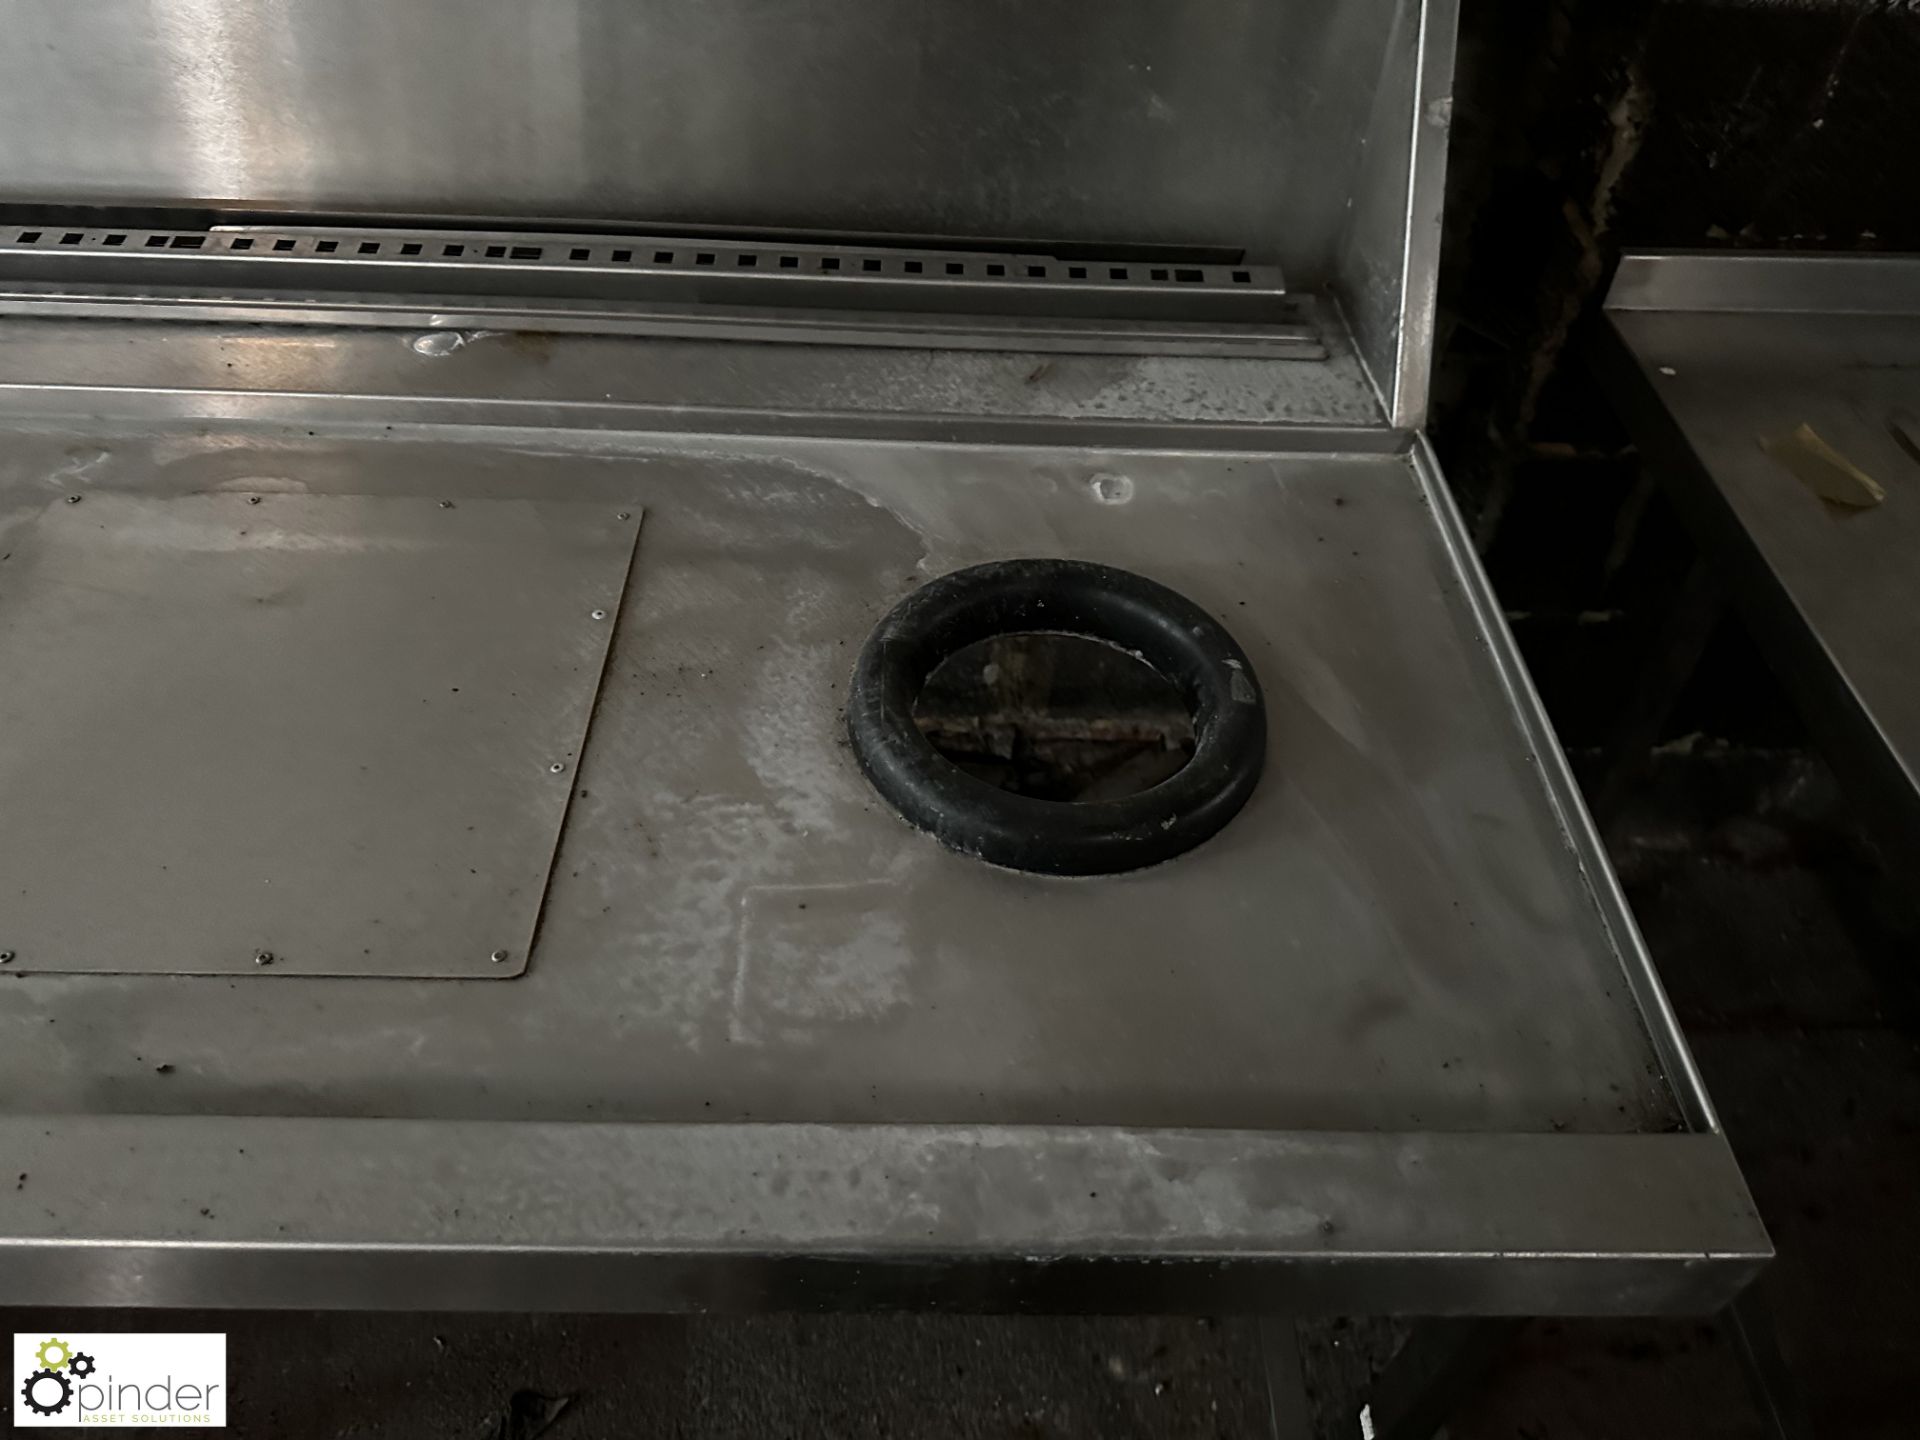 Stainless steel Wash Down Sink, 1690mm x 830mm x 910mm, with bin shoot - Image 3 of 5